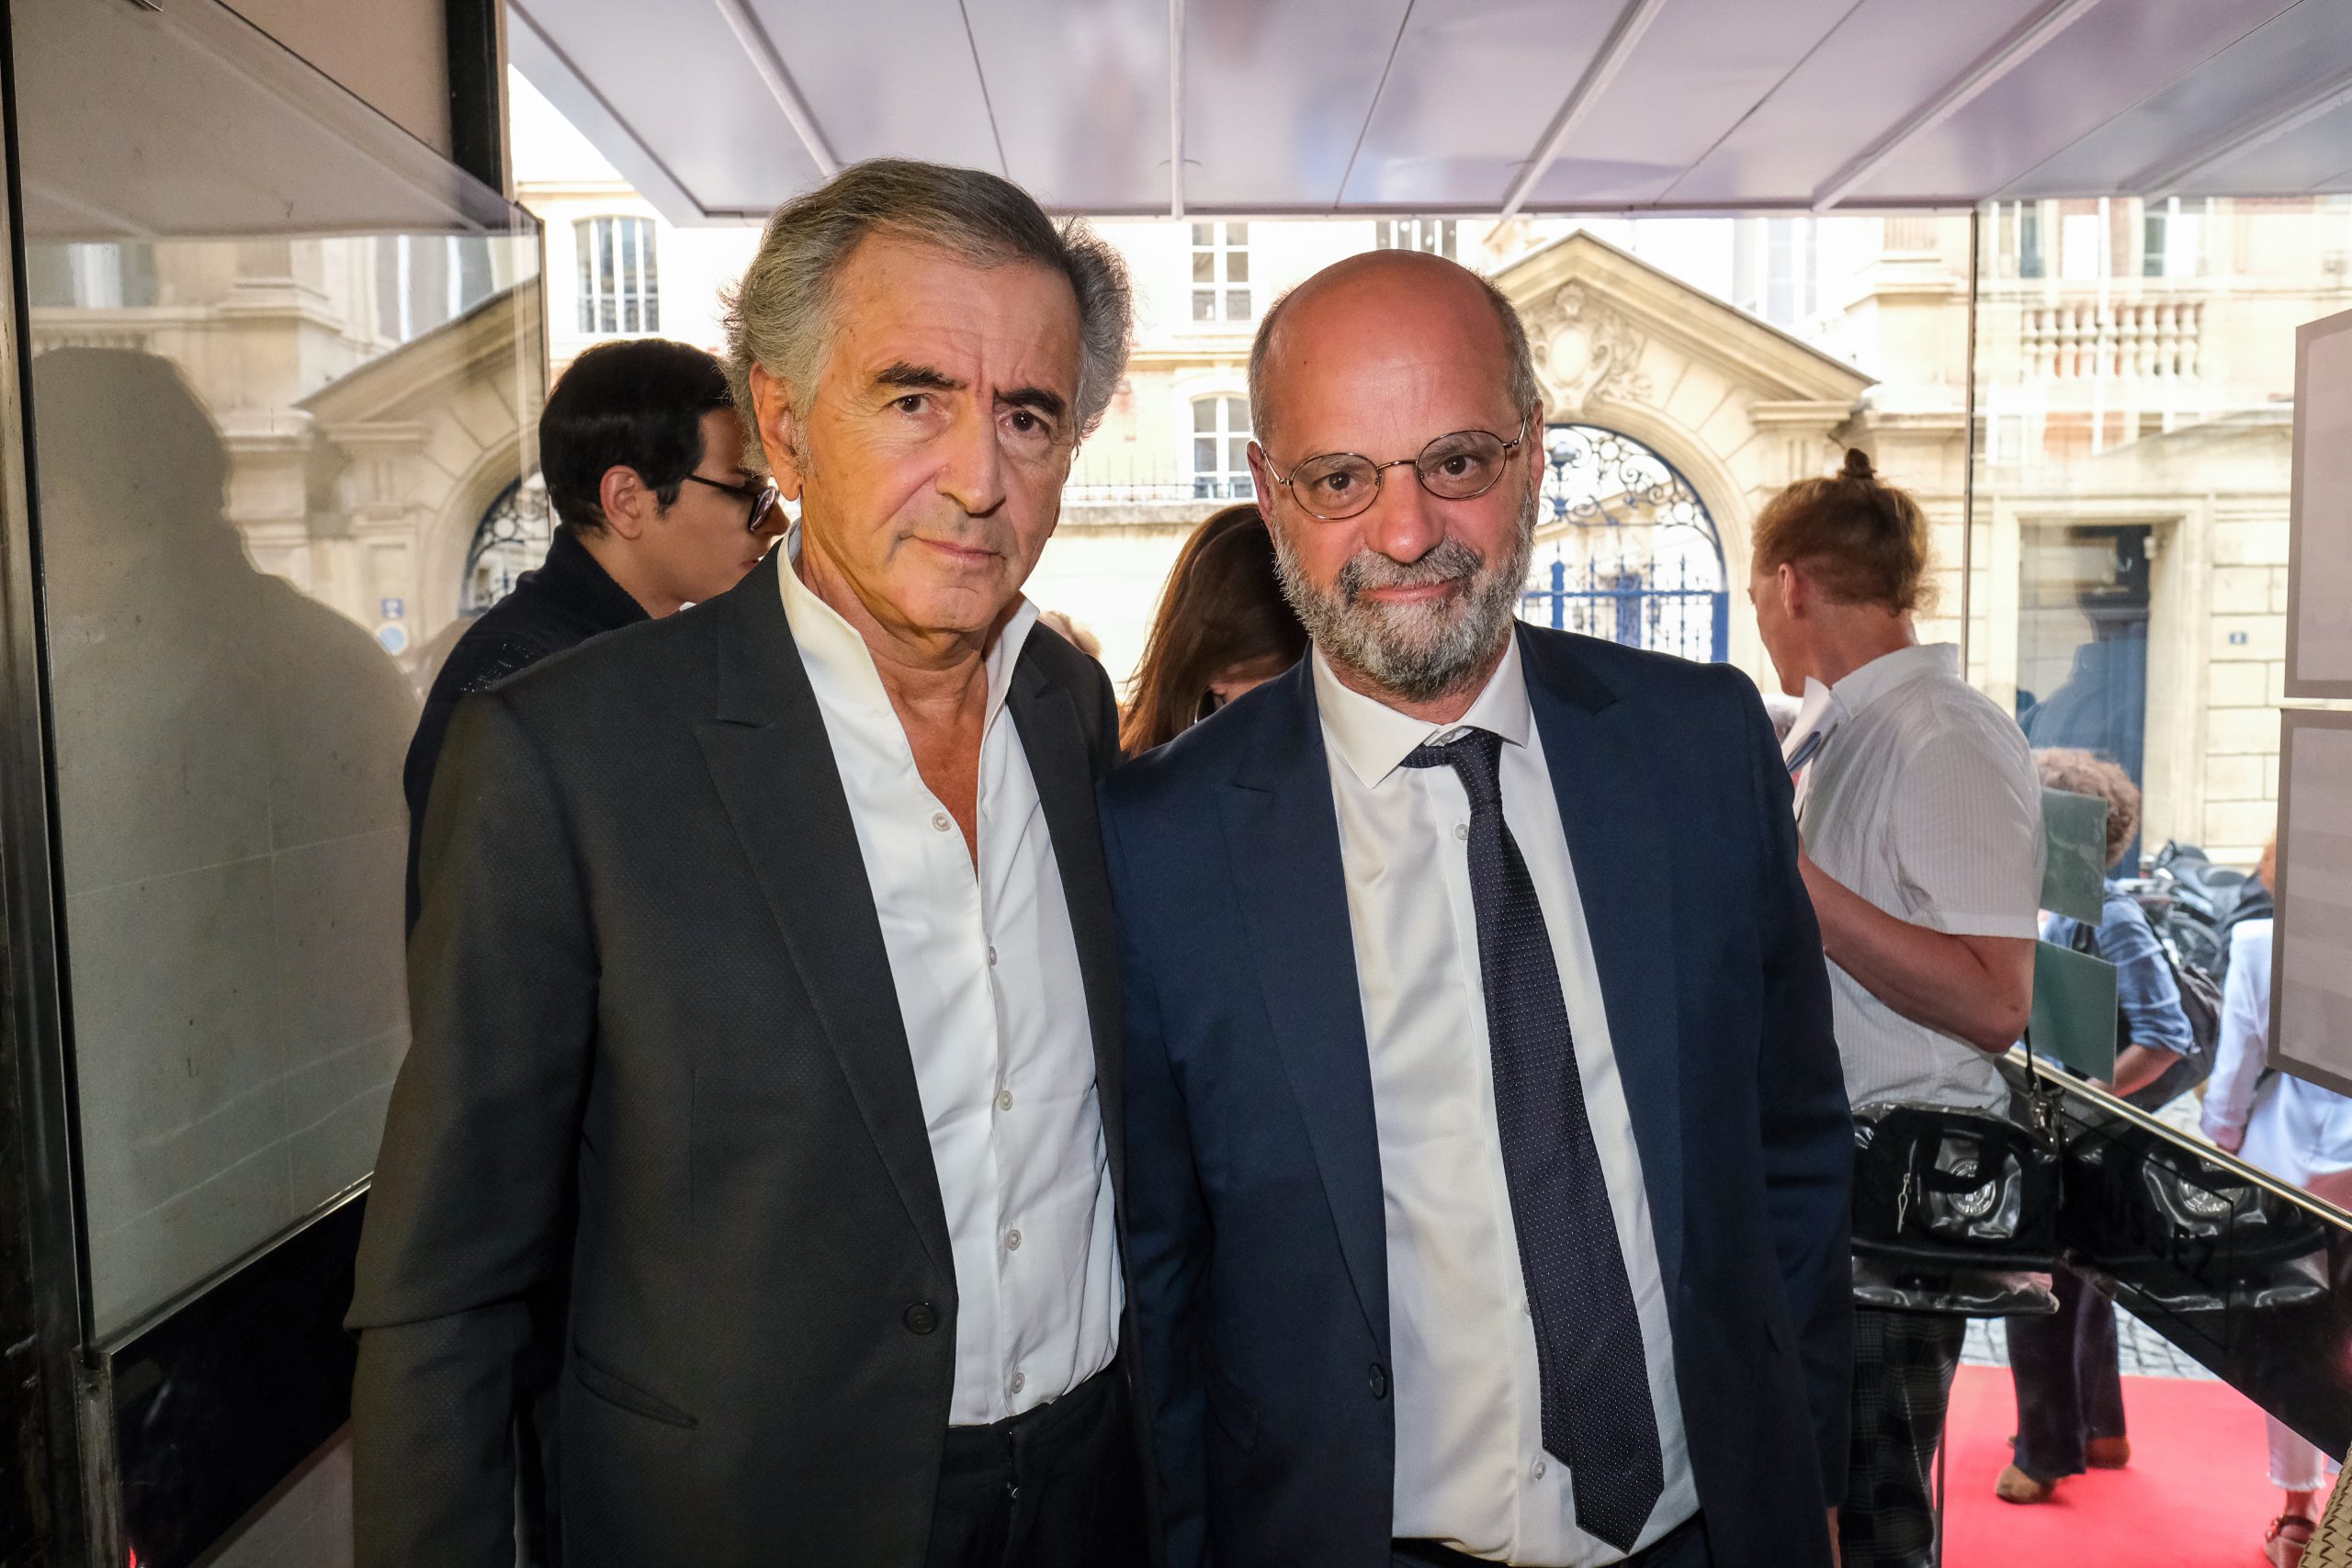 Bernard-Henri Lévy and Jean-Michel Blanquer, during the preview of BHL's film "Why Ukraine", at the Cinema Le Balzac in Paris.